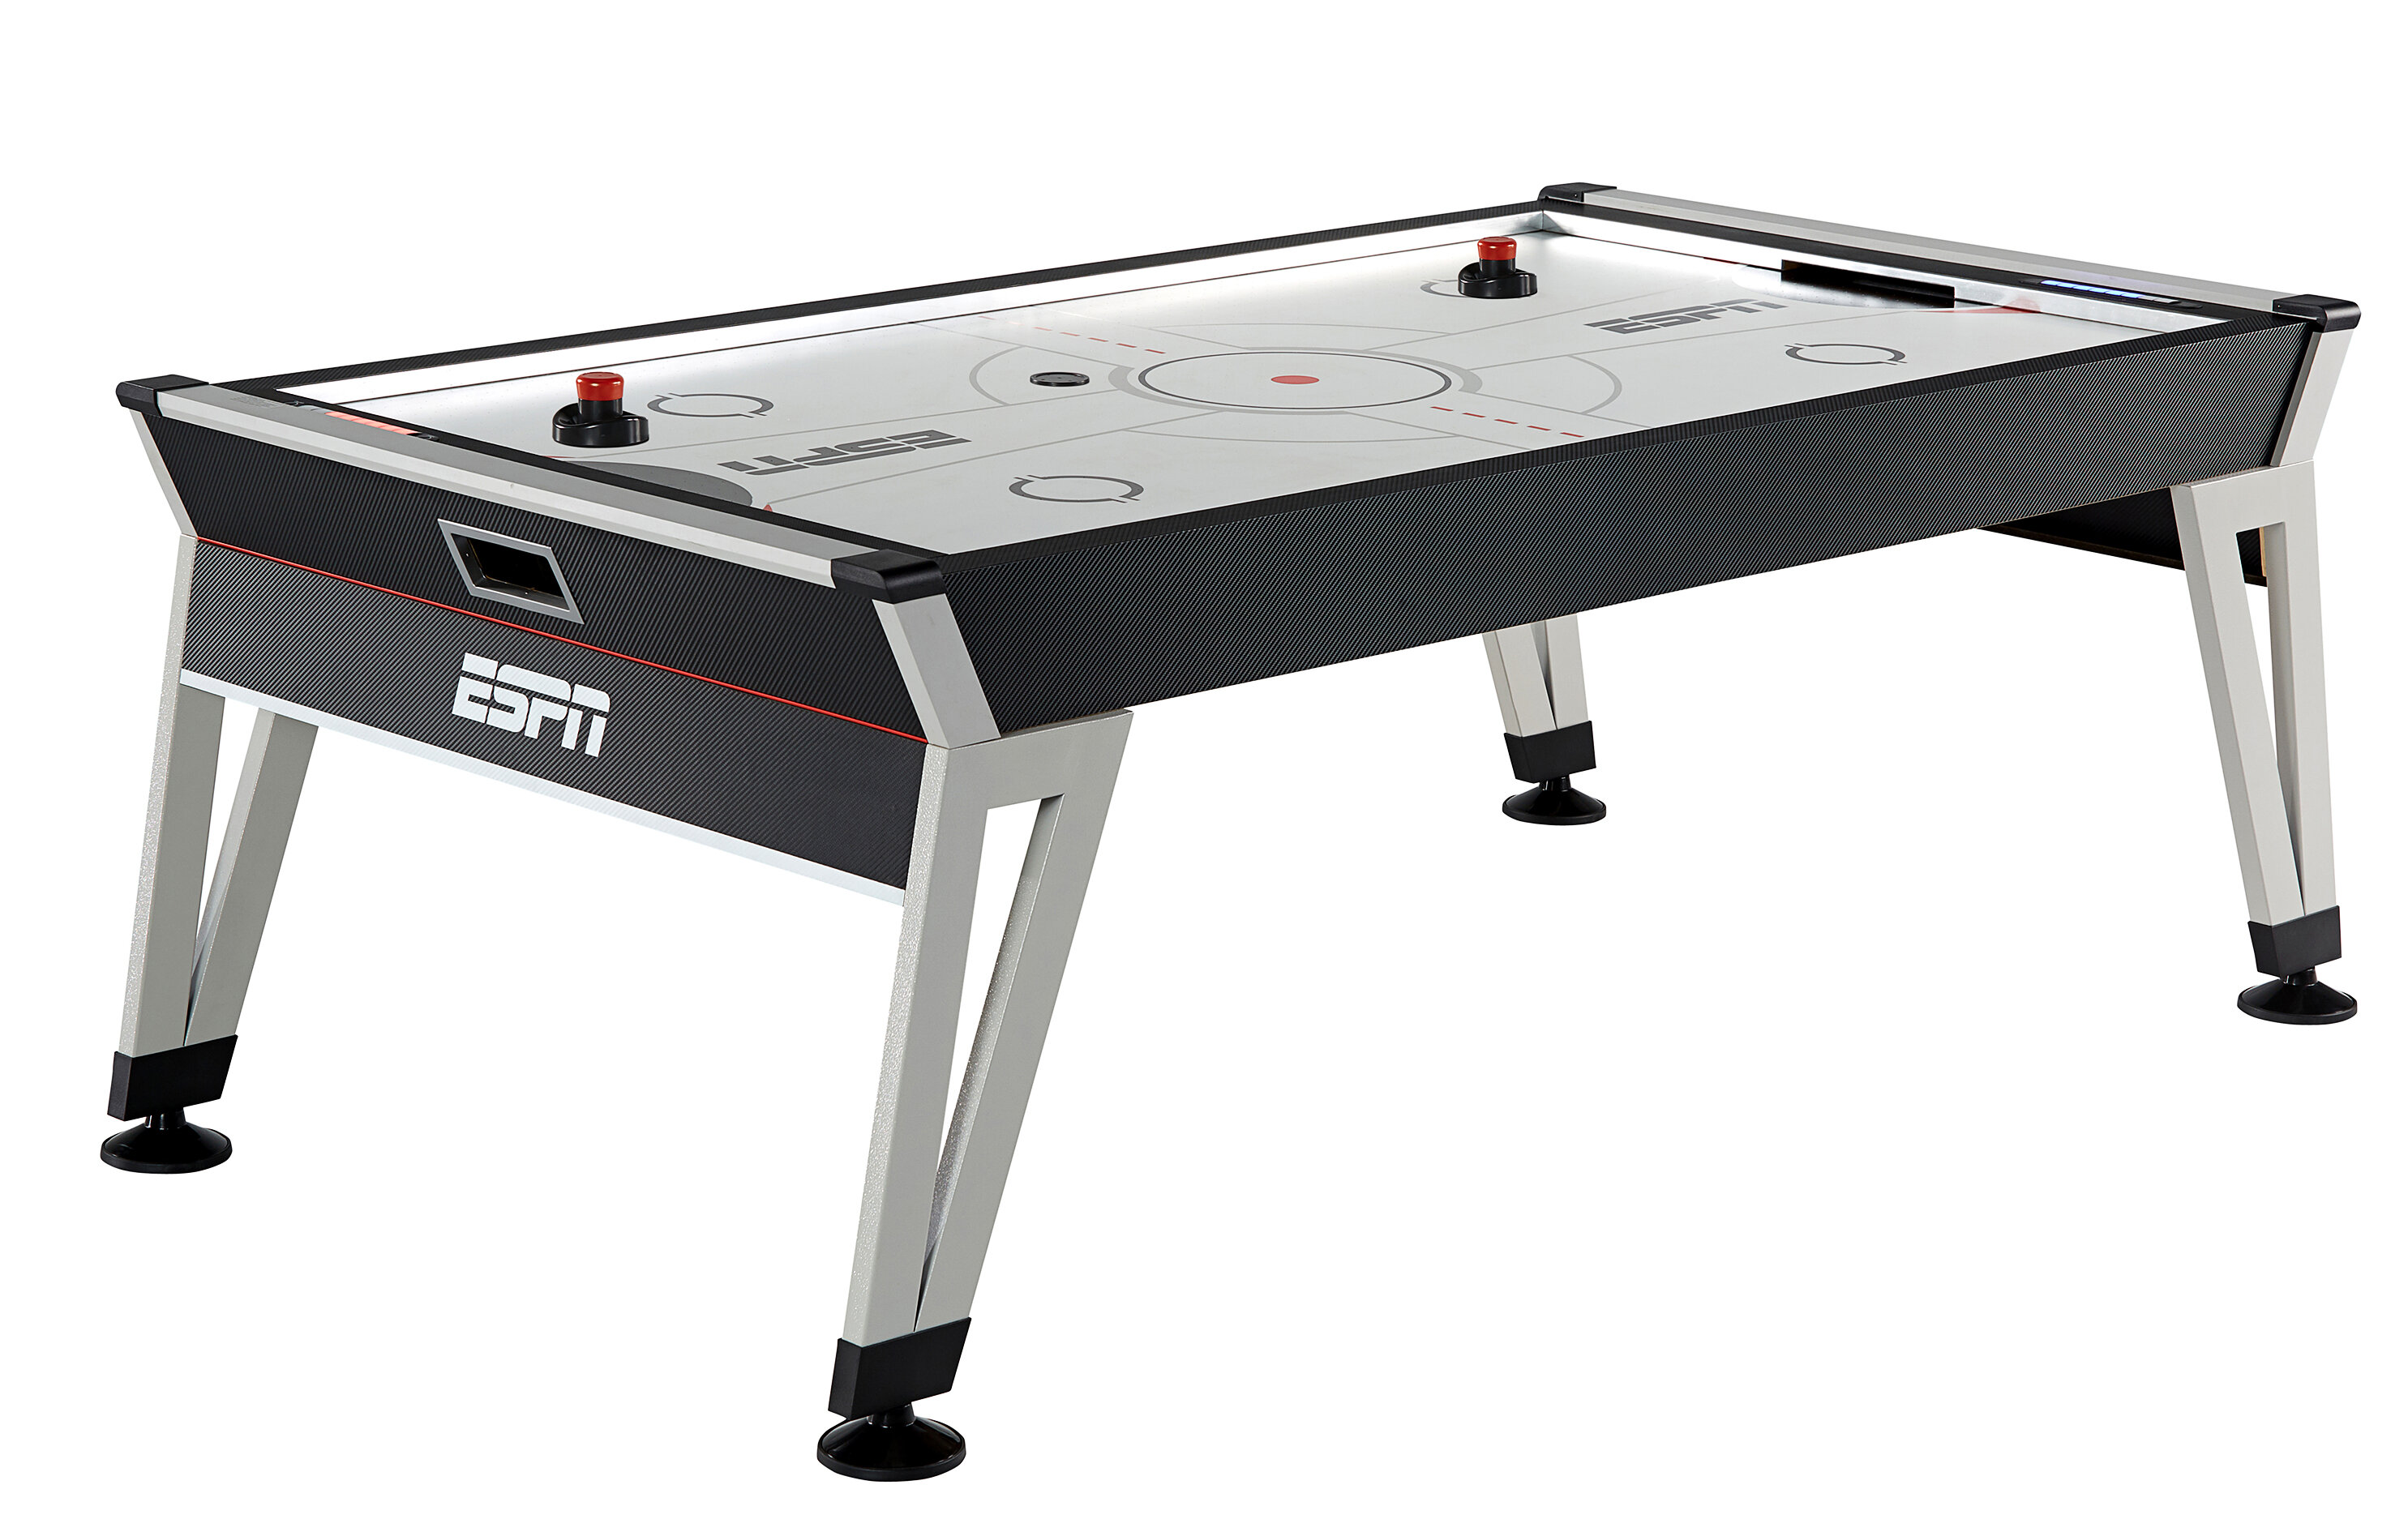 Air Hockey Table with Overhead Electronic Scorer and Pucks /& Pushers Set Family Indoor Game Blue//Red ESPN 5 Ft